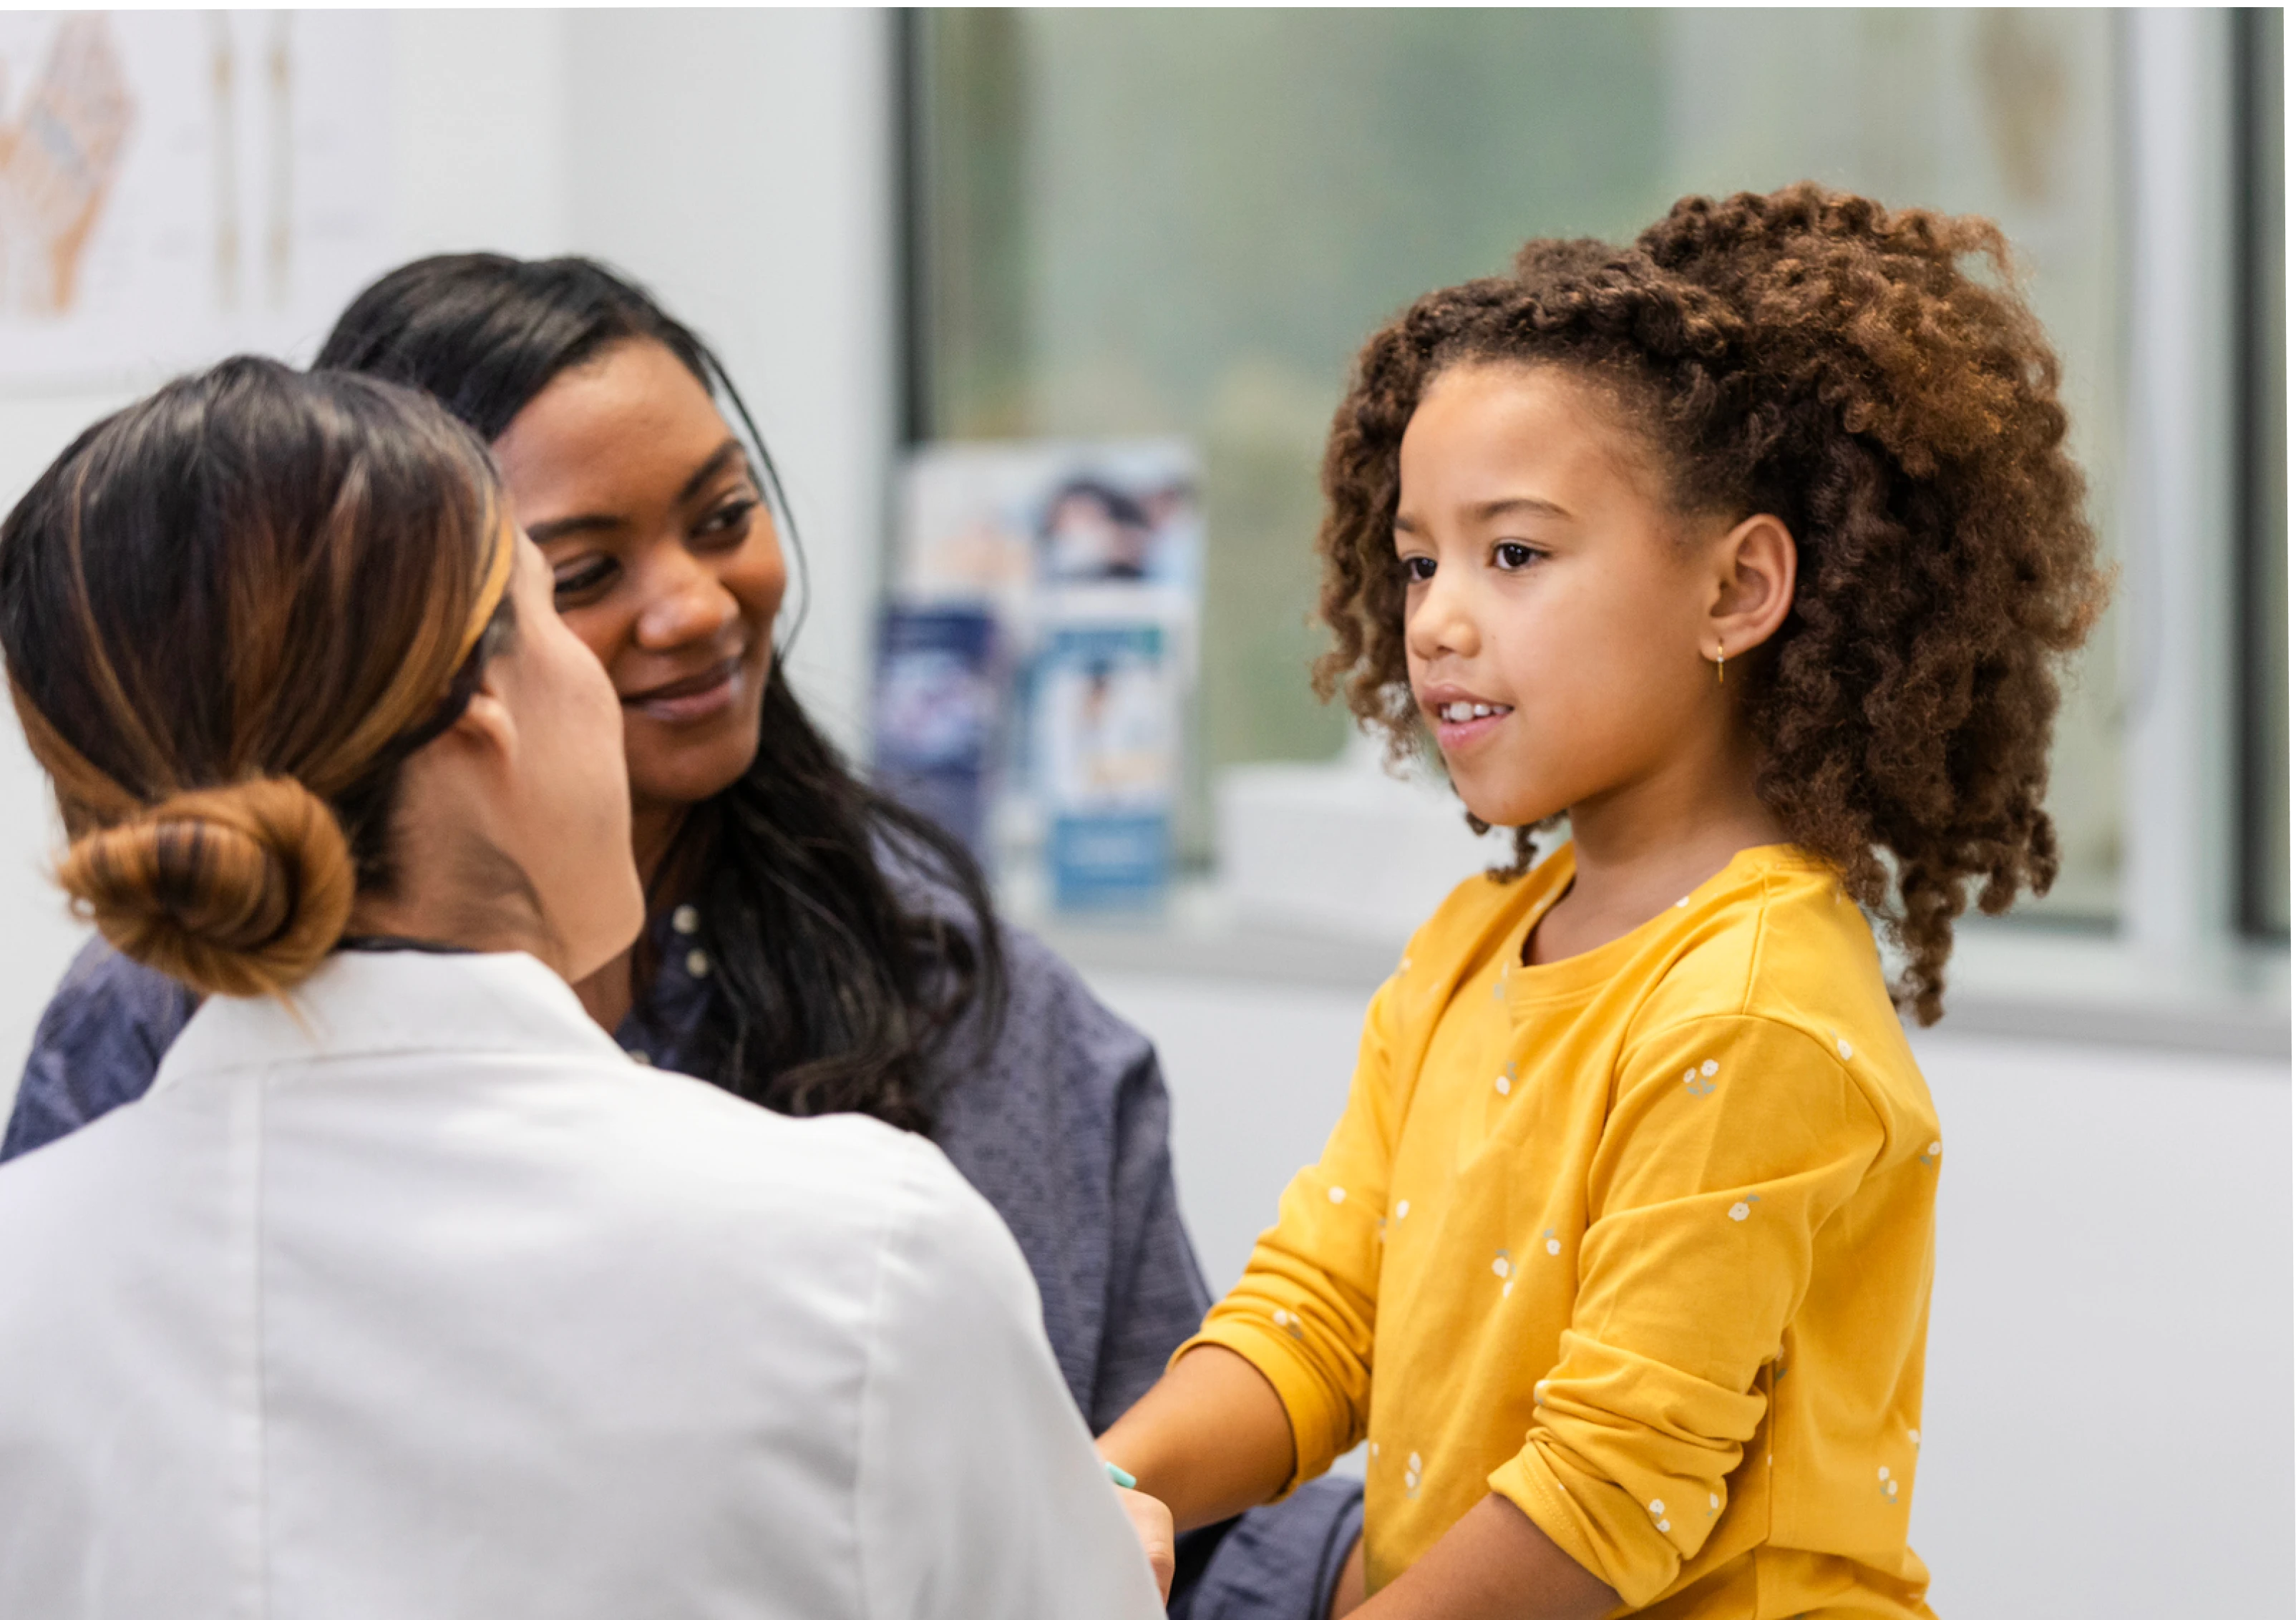 A child sitting in an urgent care clinic looking at a doctor, whose back is to the camera. The parent’s child is looking at the child and smiling.